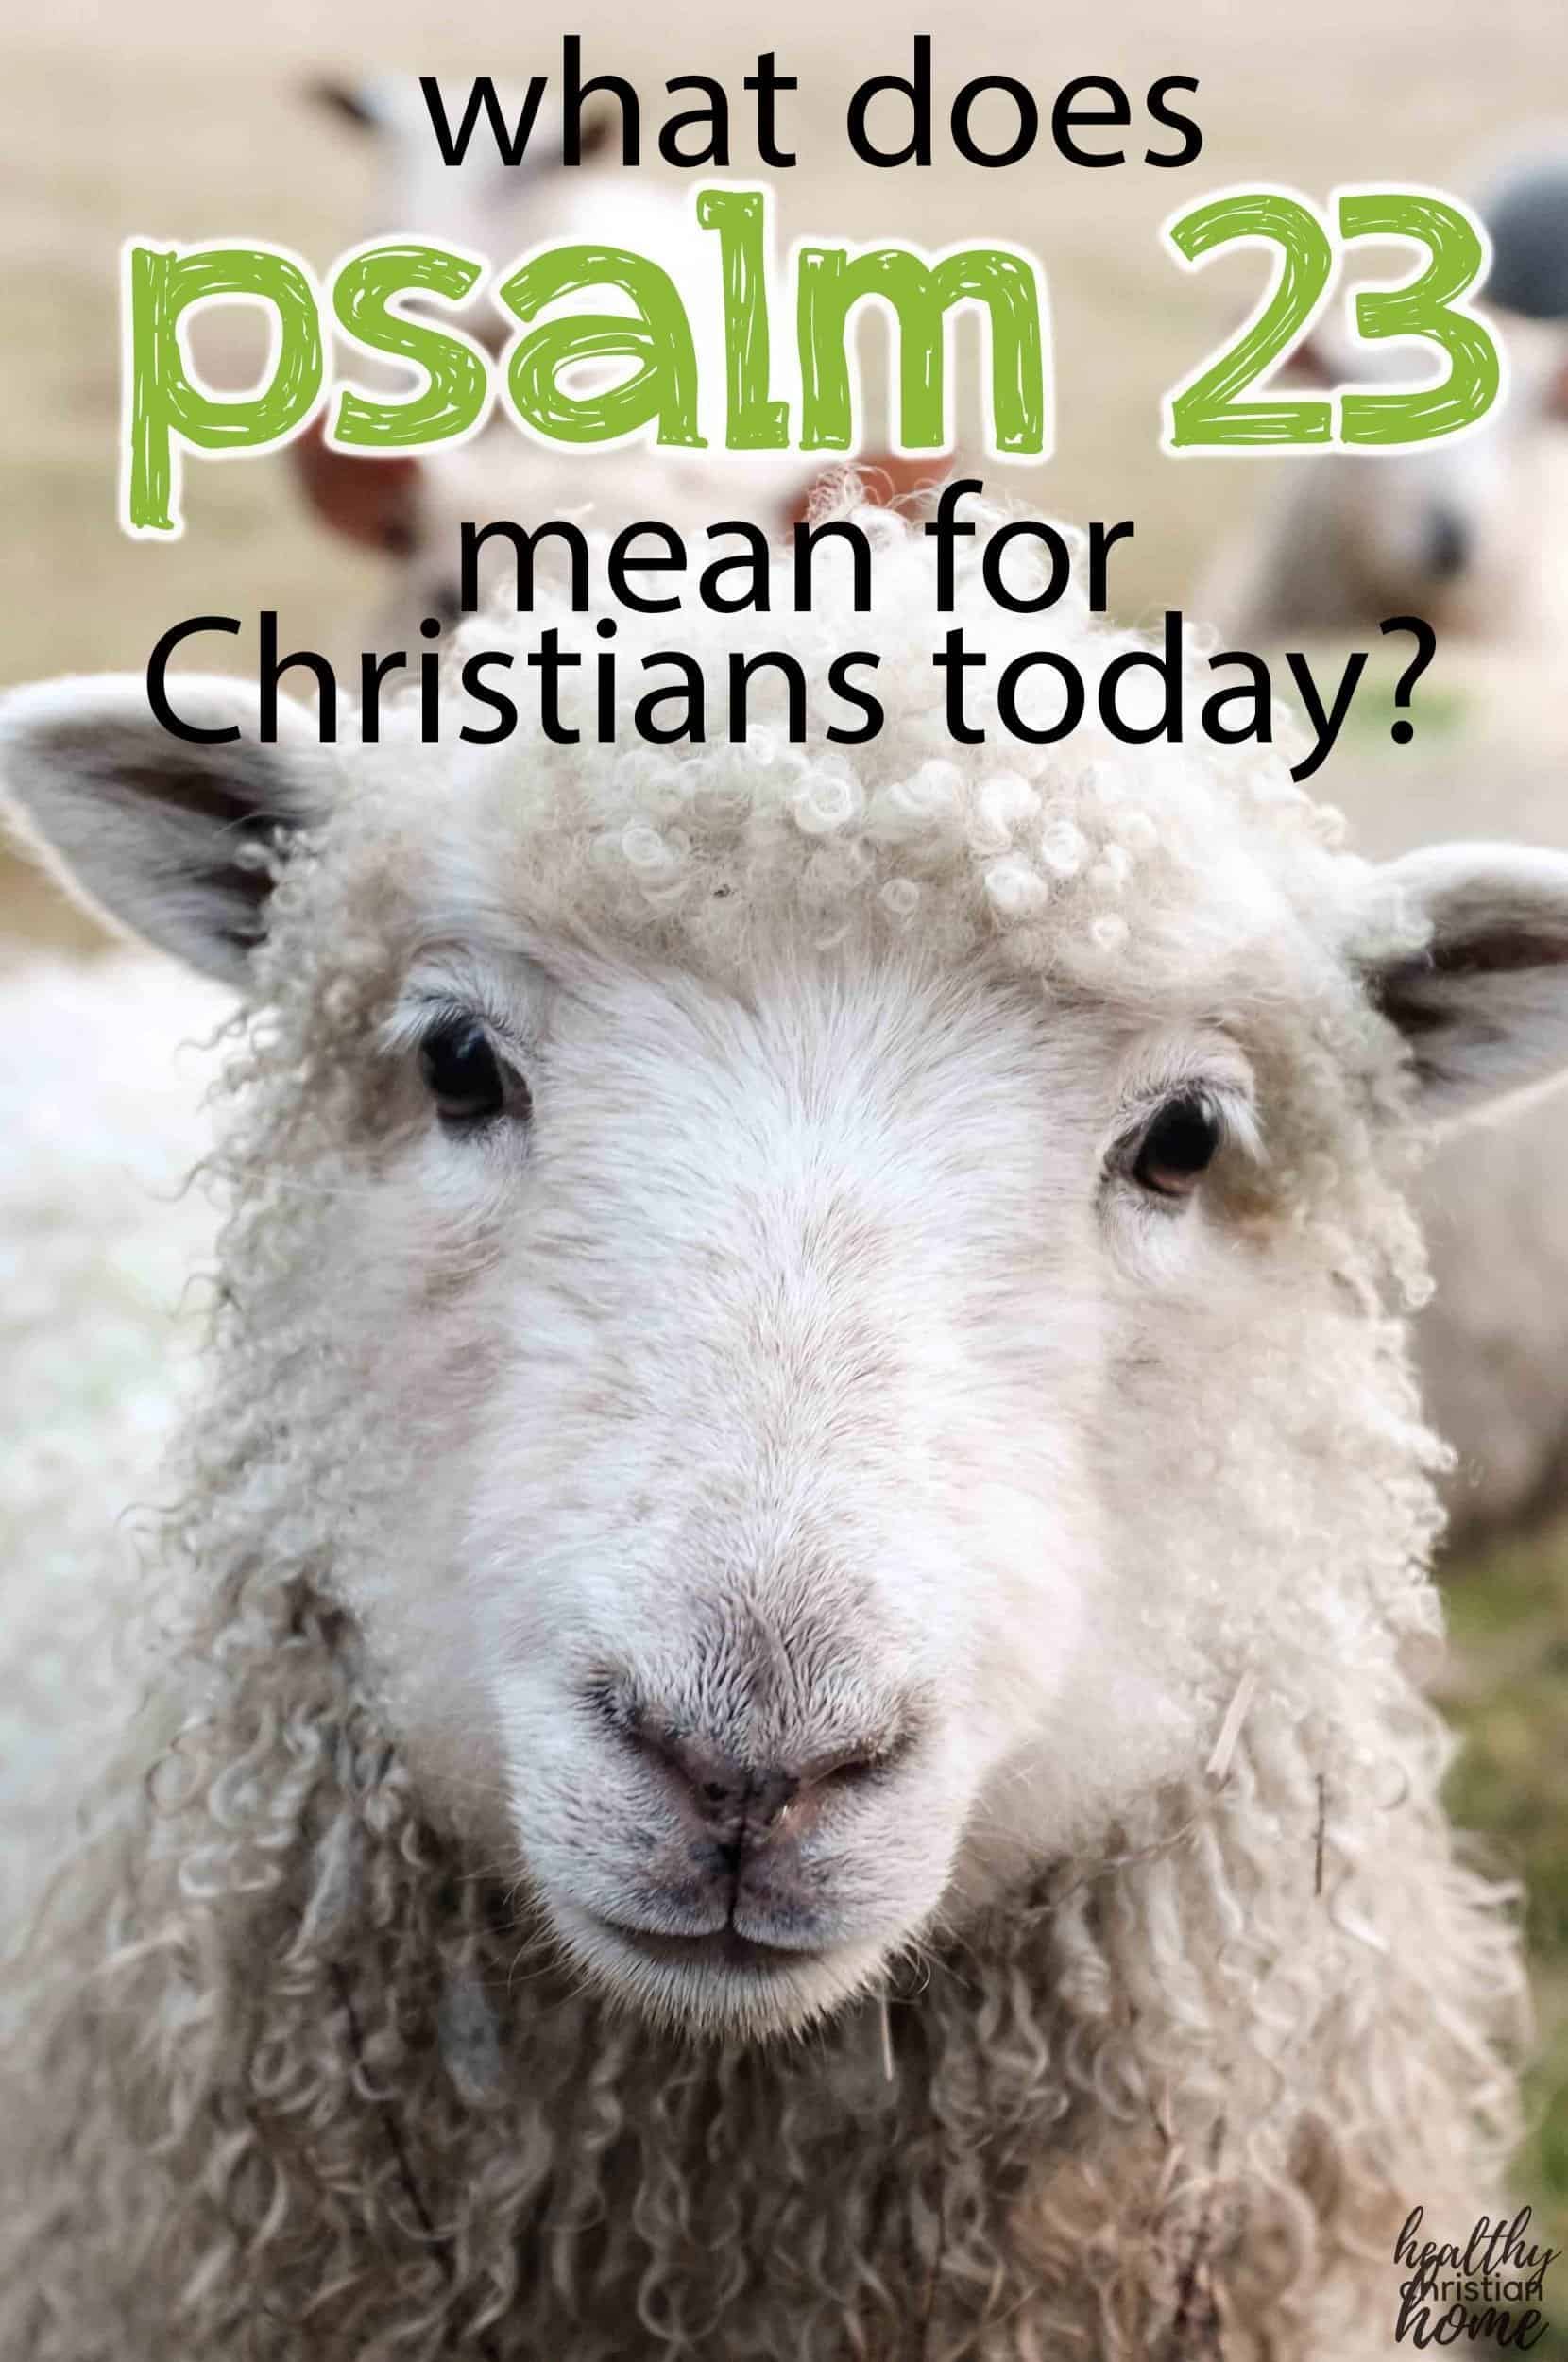 A sheep's face with text overlay about "Psalm 23"